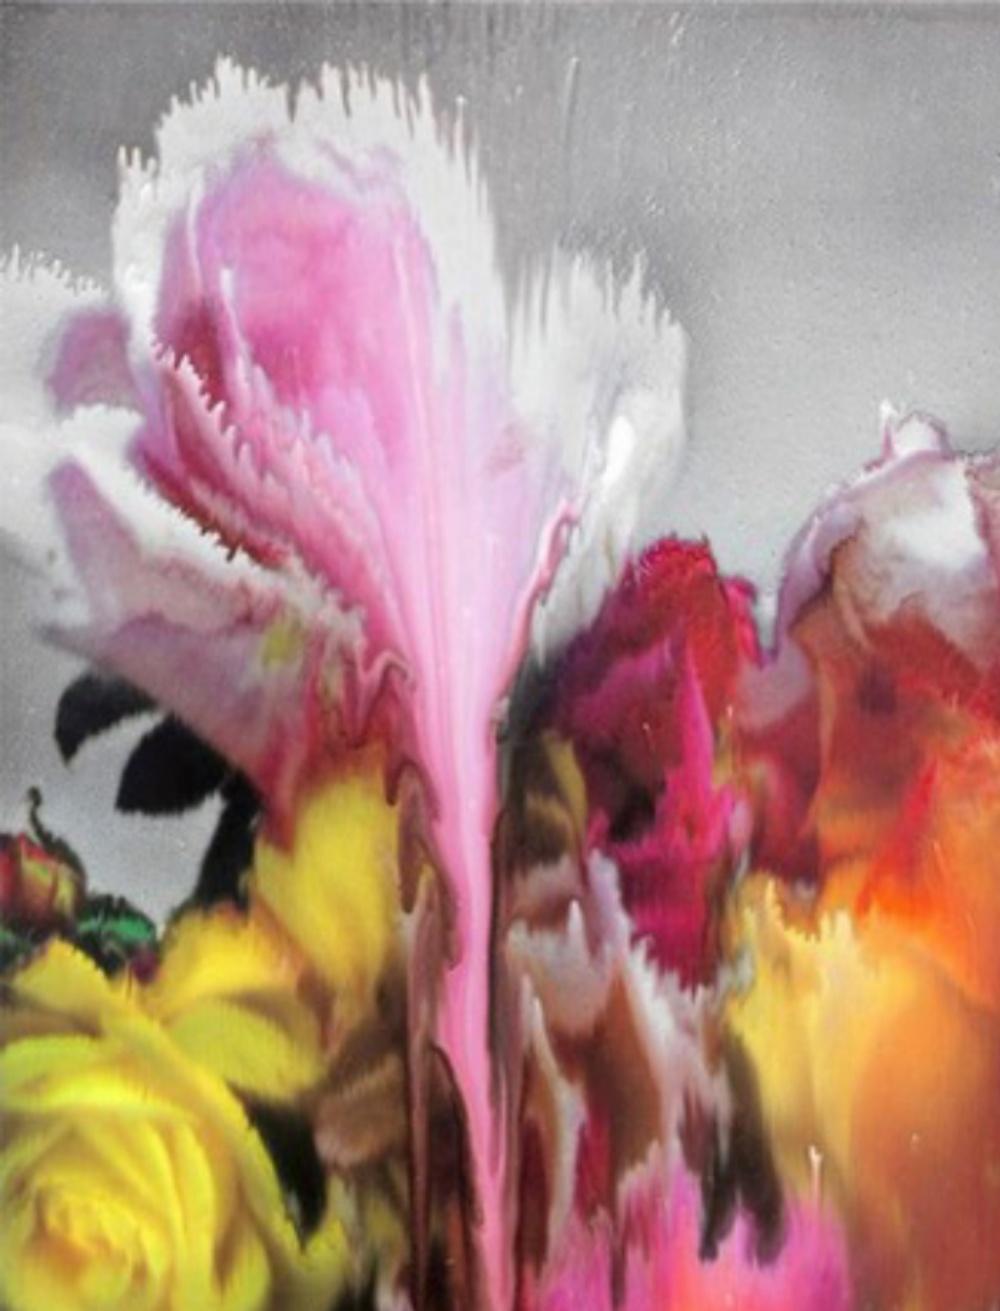 NICK KNIGHT (*1958, Great Britain) 
Rose V
2012
Hand-coated pigment print
Sheet 117.4 x 76.2 cm (46 1/4 X 30 in.)
Edition of 9, plus 2 AP; Ed. no. 4/9
Print only

Nick Knight is among the world’s most influential and visionary photographers. He has